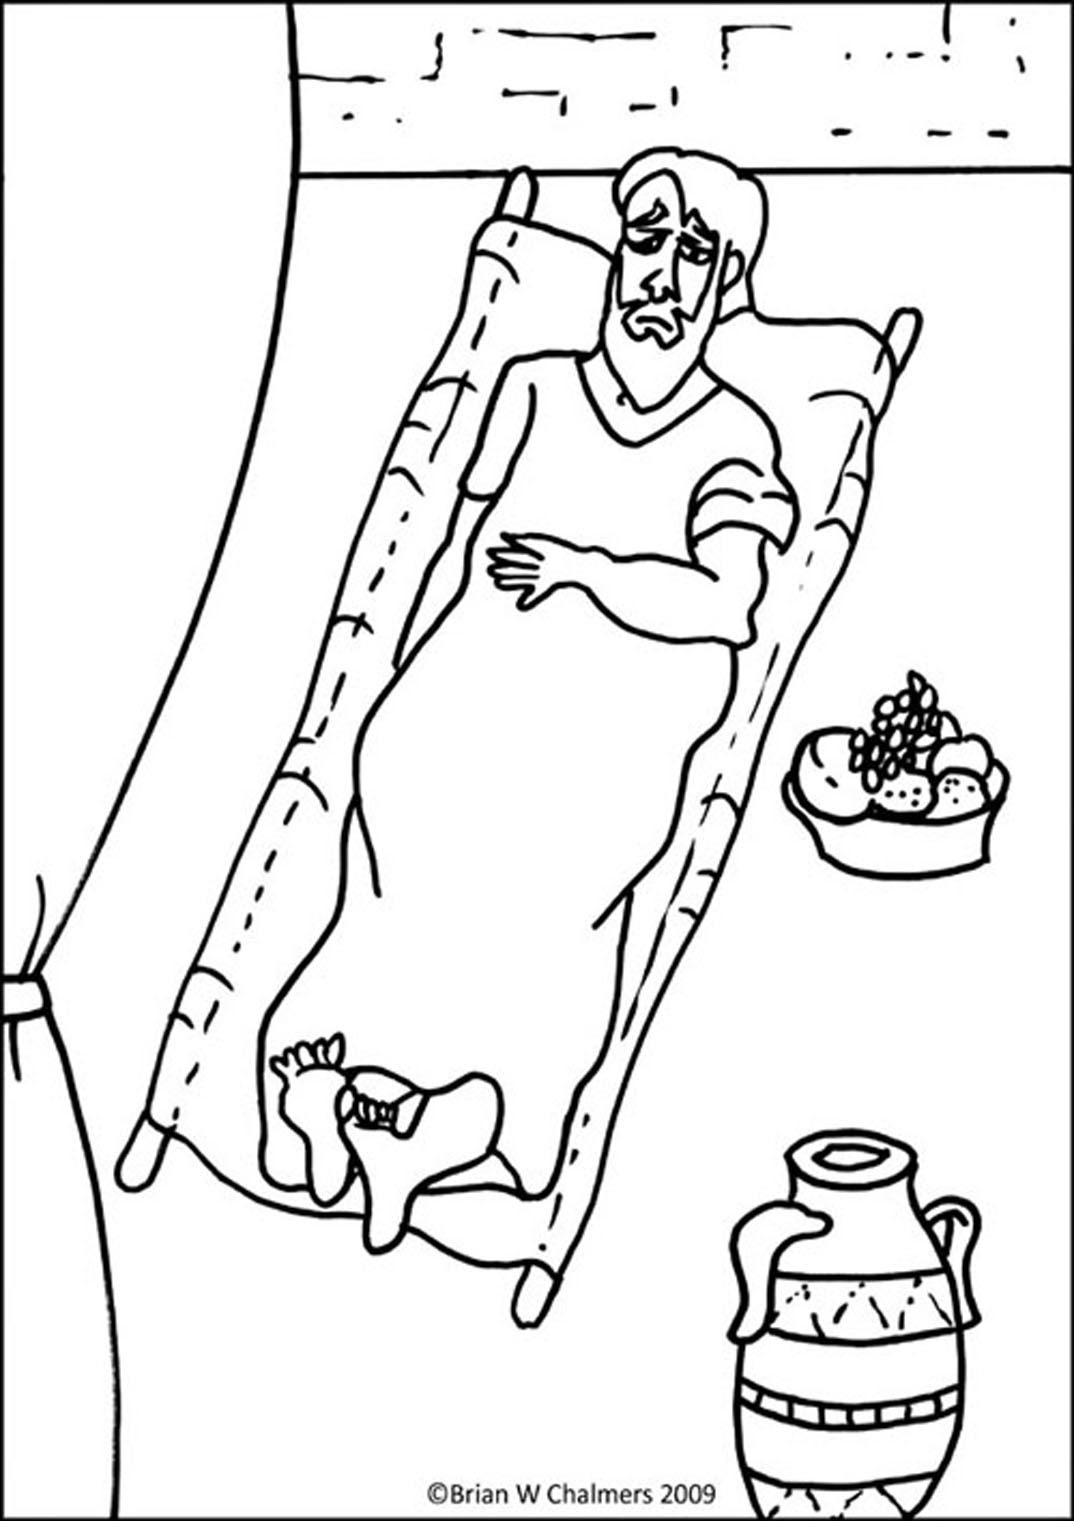 Pool Of Bethesda Coloring Page